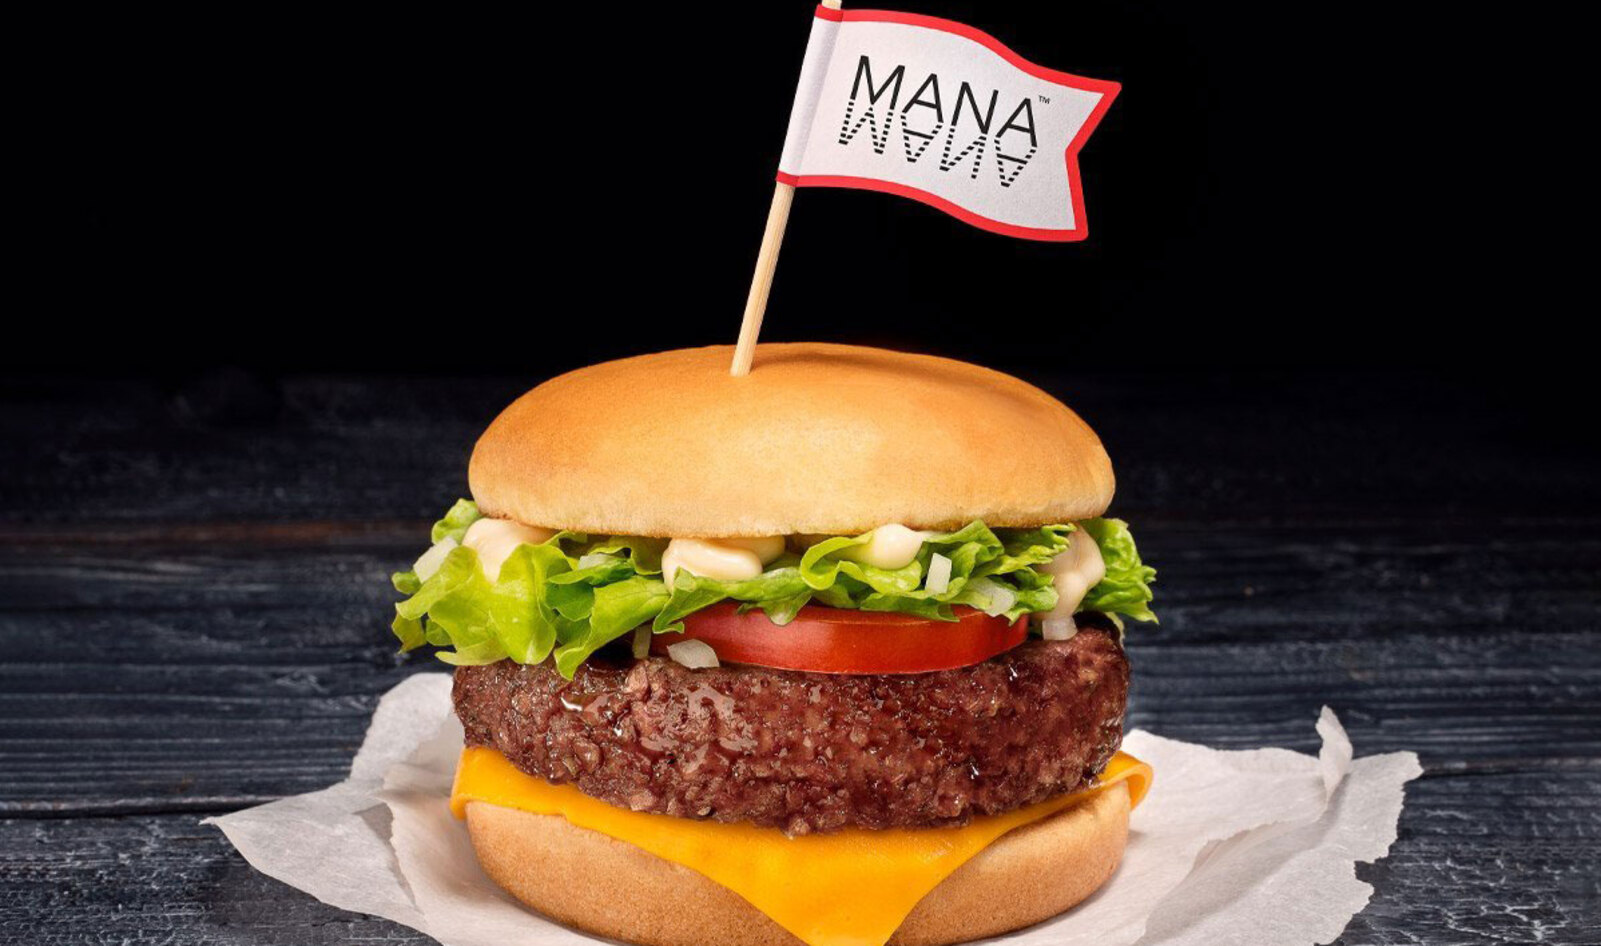 Czech Brand to Launch Nutritionally Complete Vegan Burger in the United States